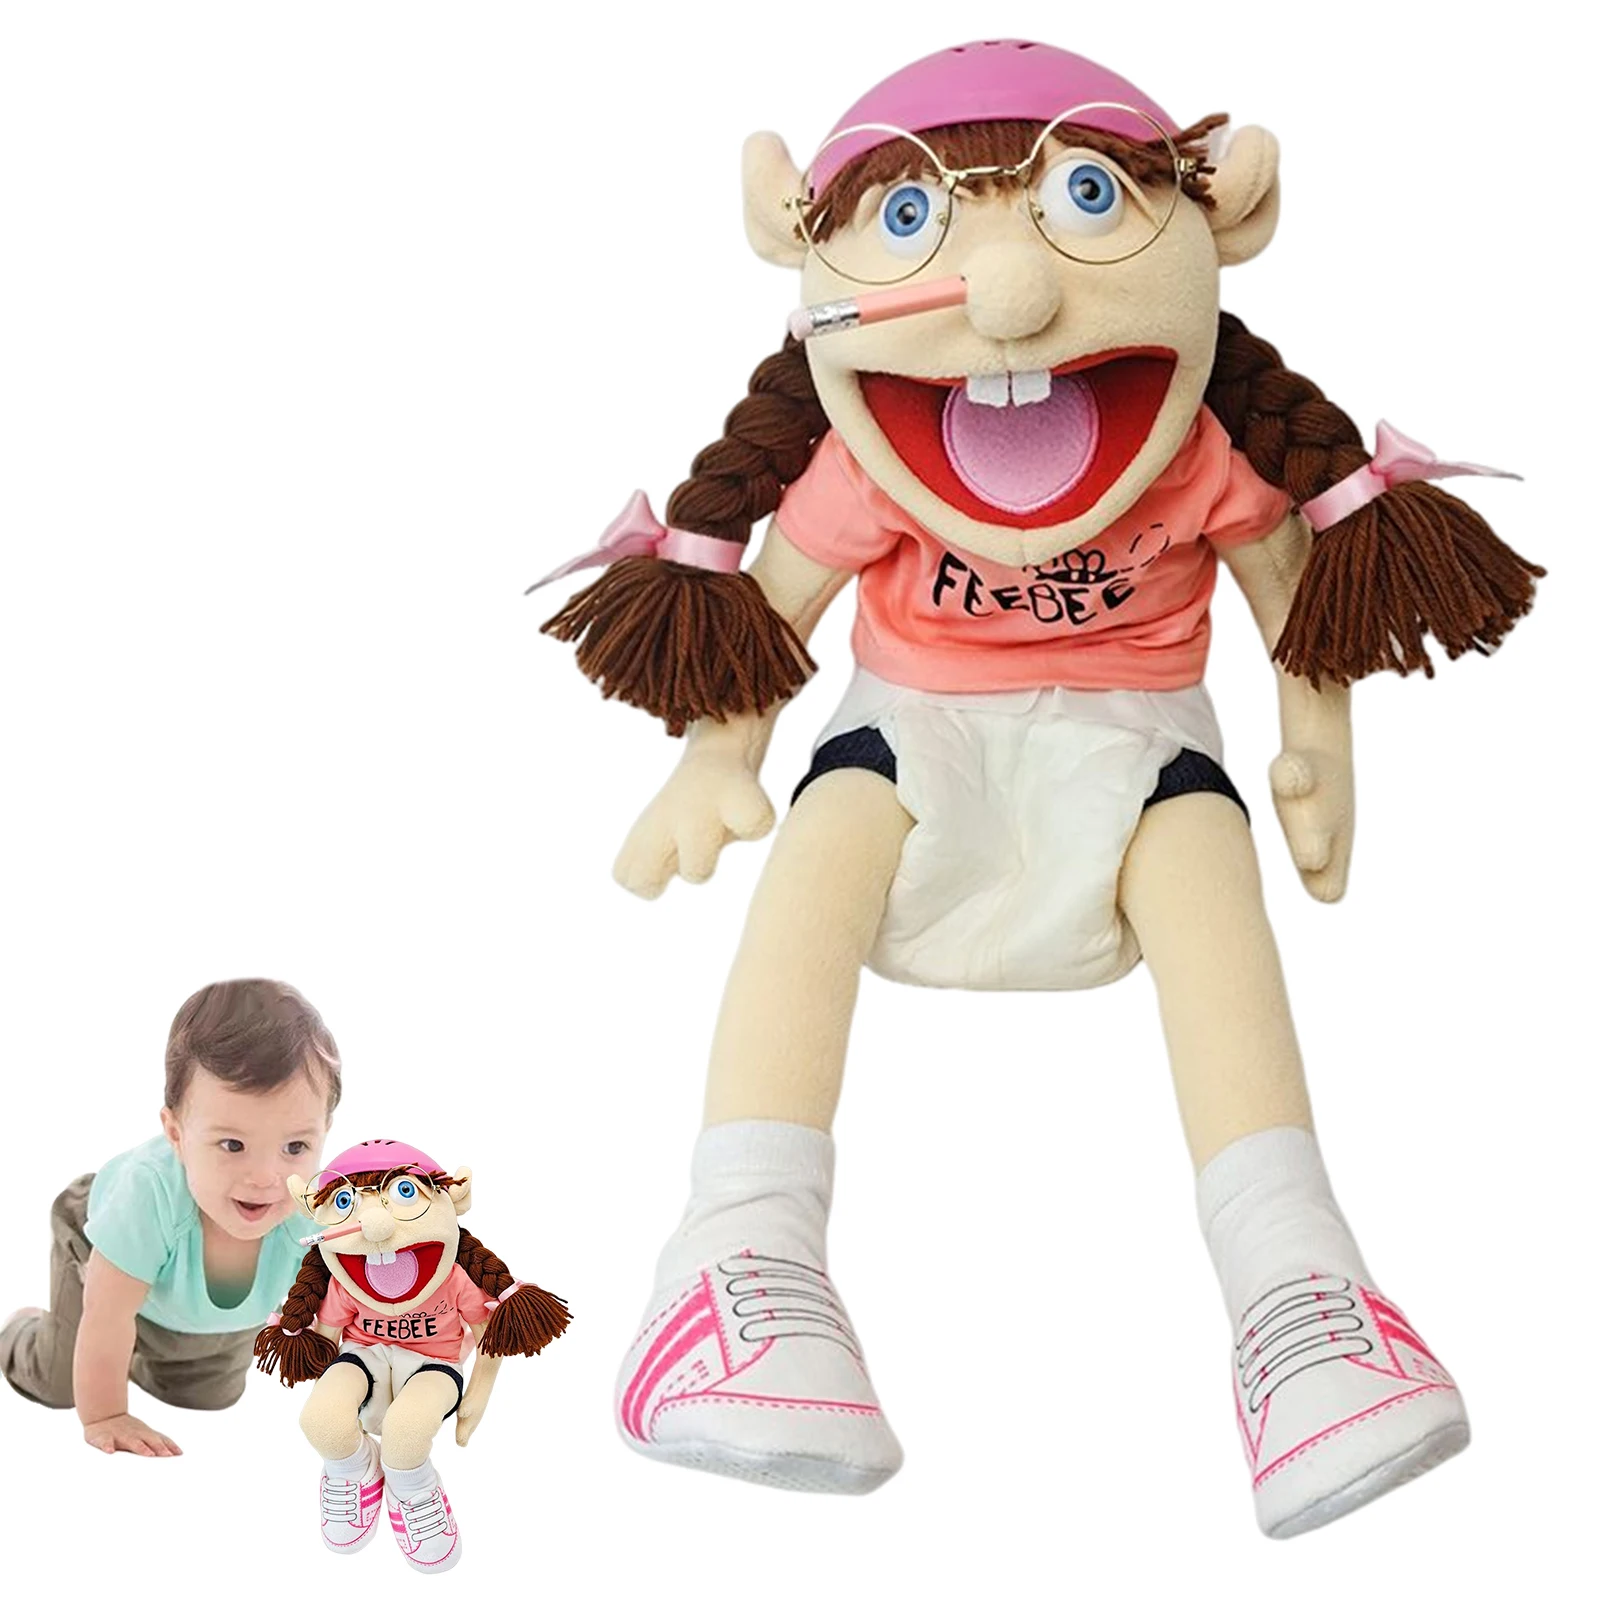 

Large Feebee Hand Puppet Jeffy Sister Muppet Plush Toy Brother Talk Show Party Props Christmas Plushie Doll for Boys Girls Gifts